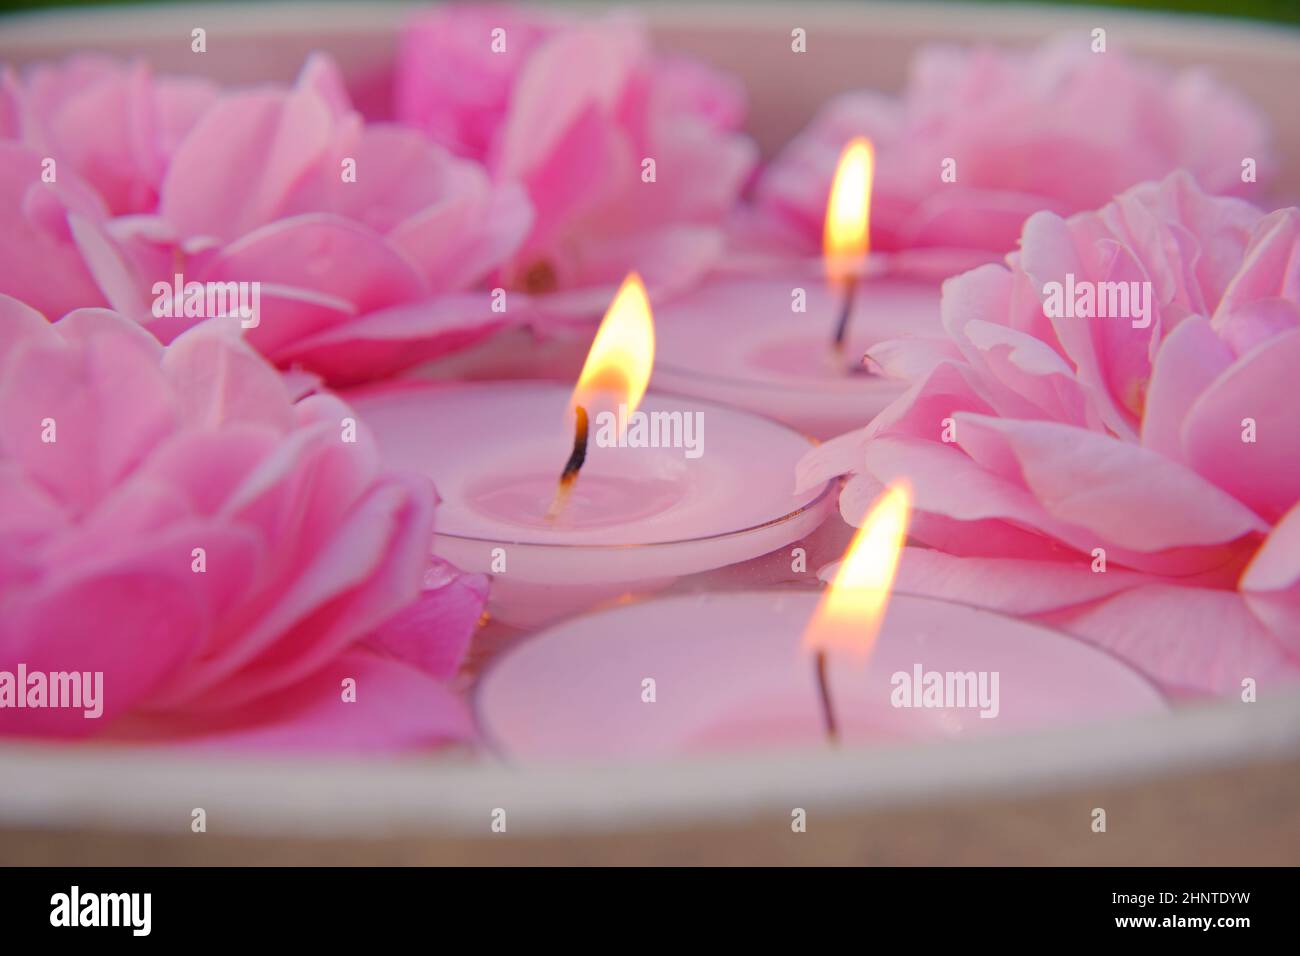 Pink Rose Petals And Candles